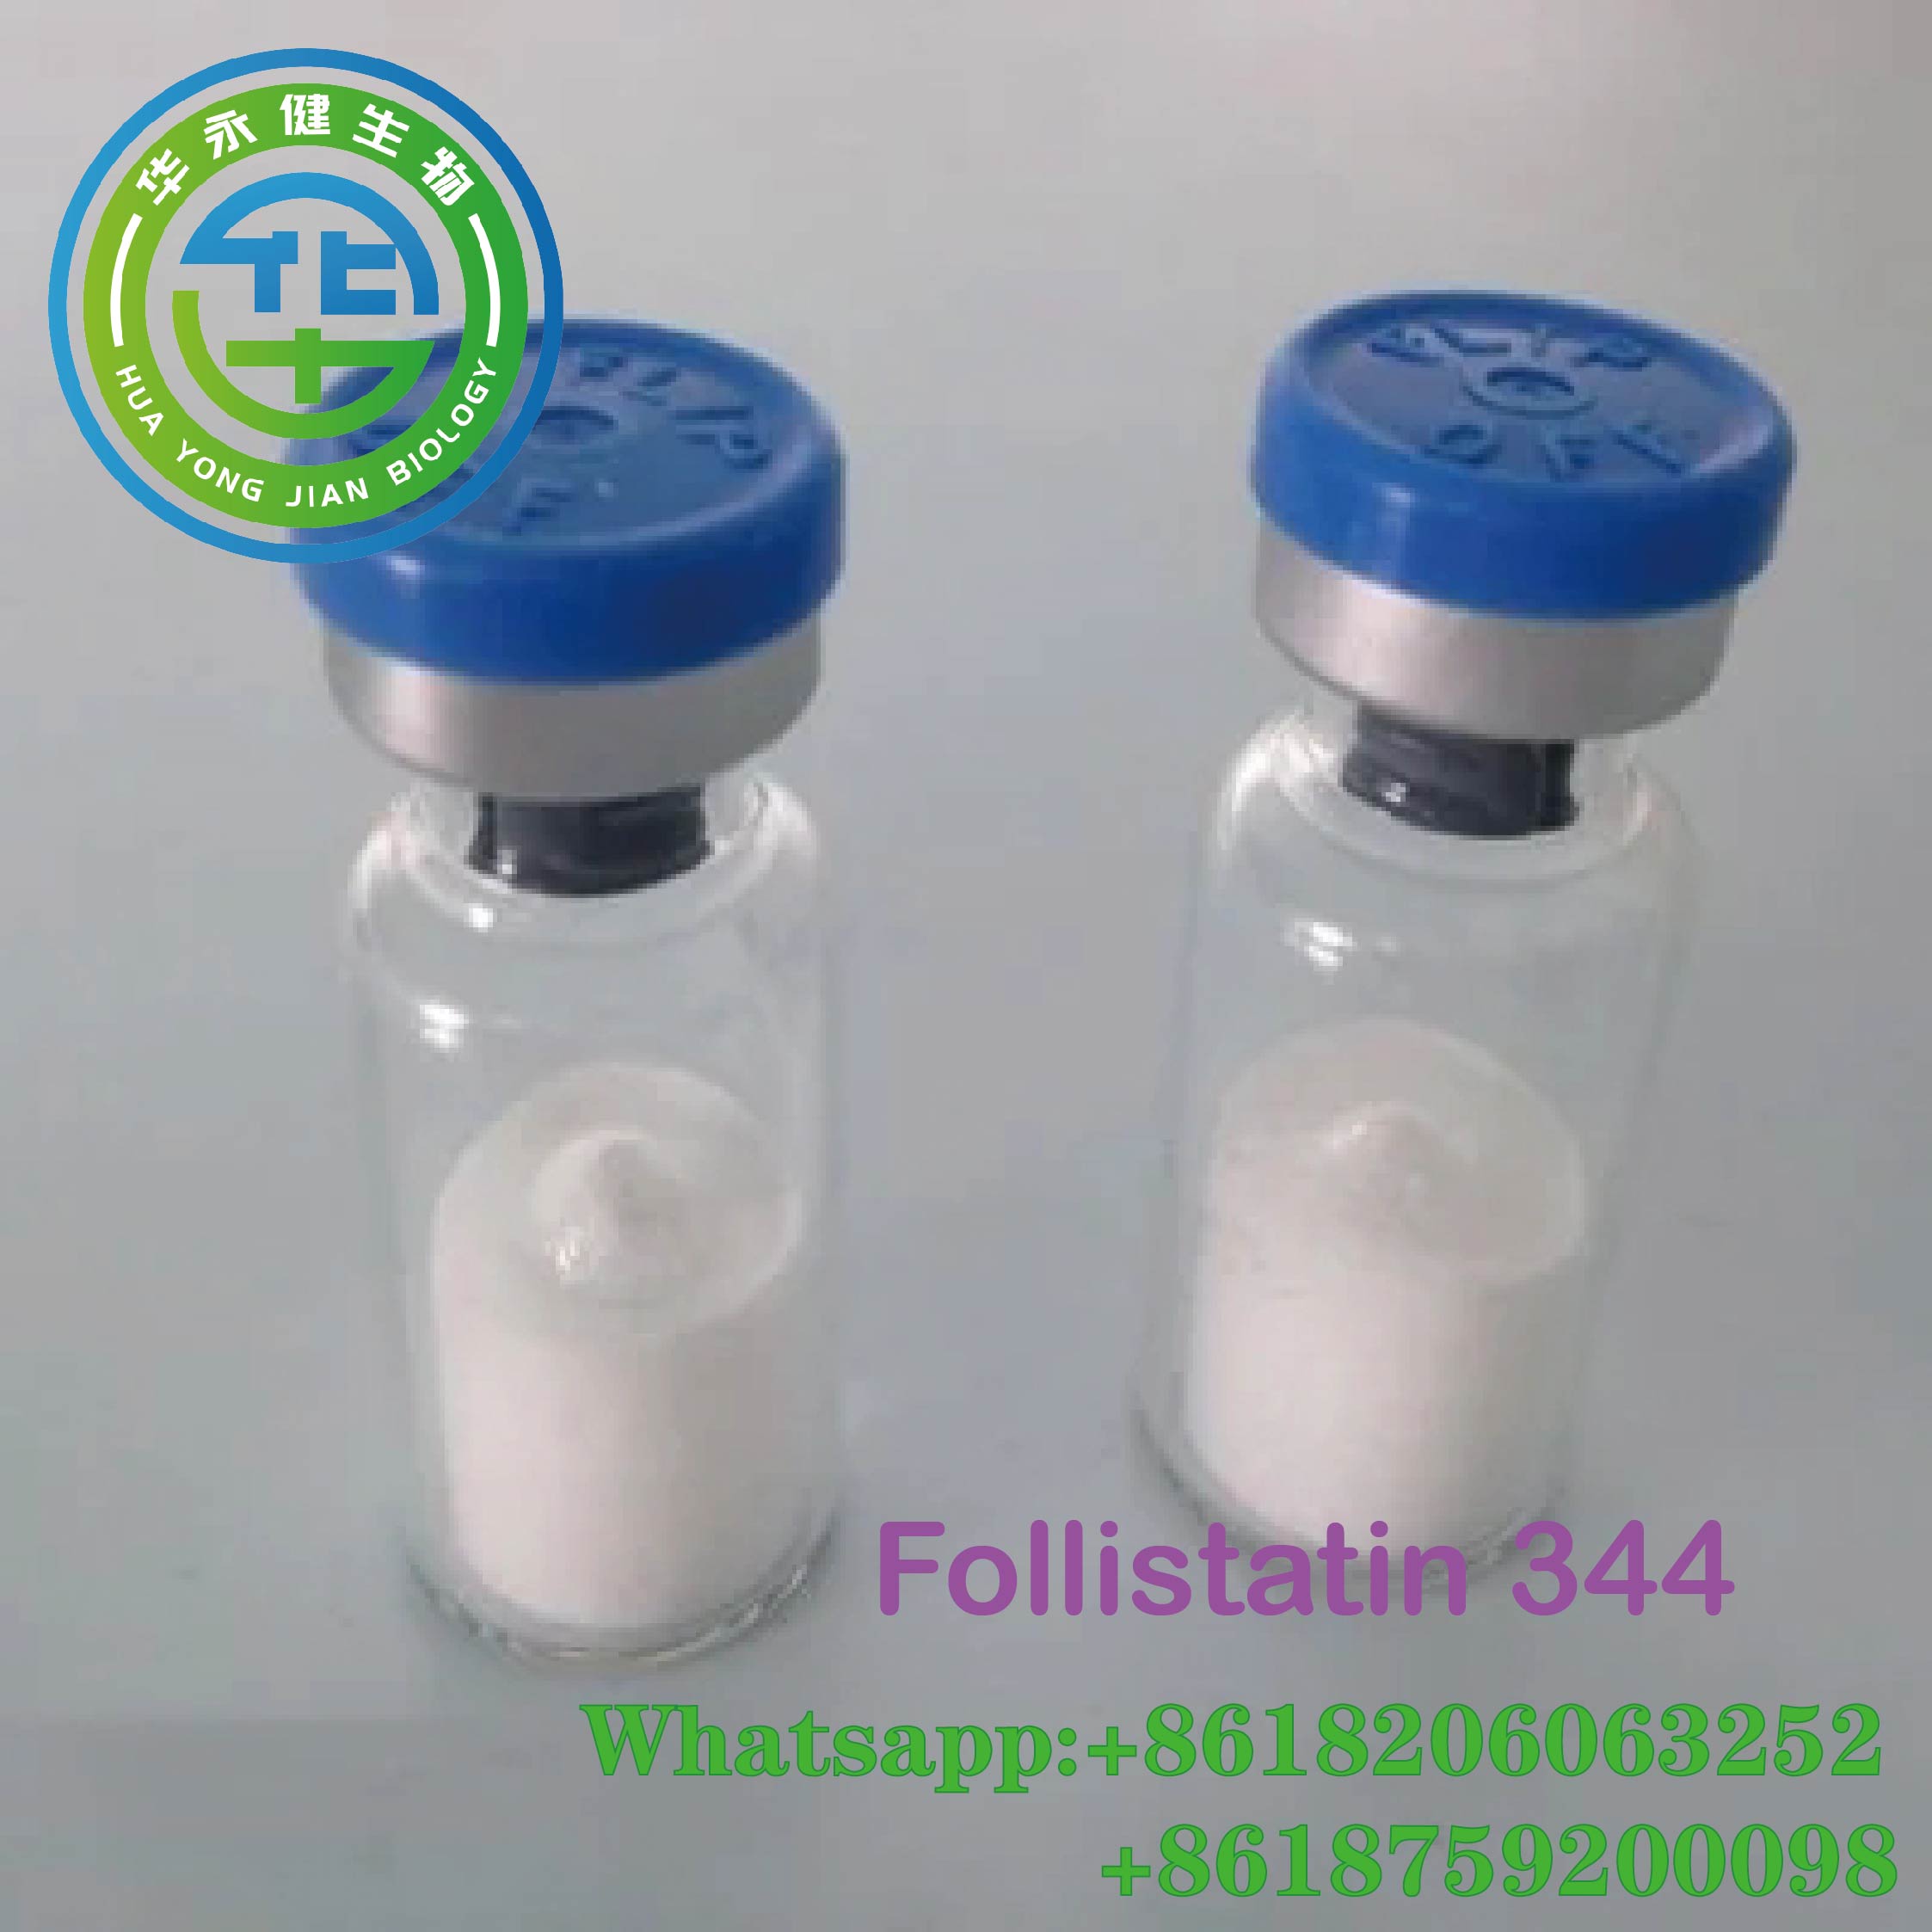 High Purity FST 344 Human Growth Hormone Follistatin 344  For Builds Lean Muscle